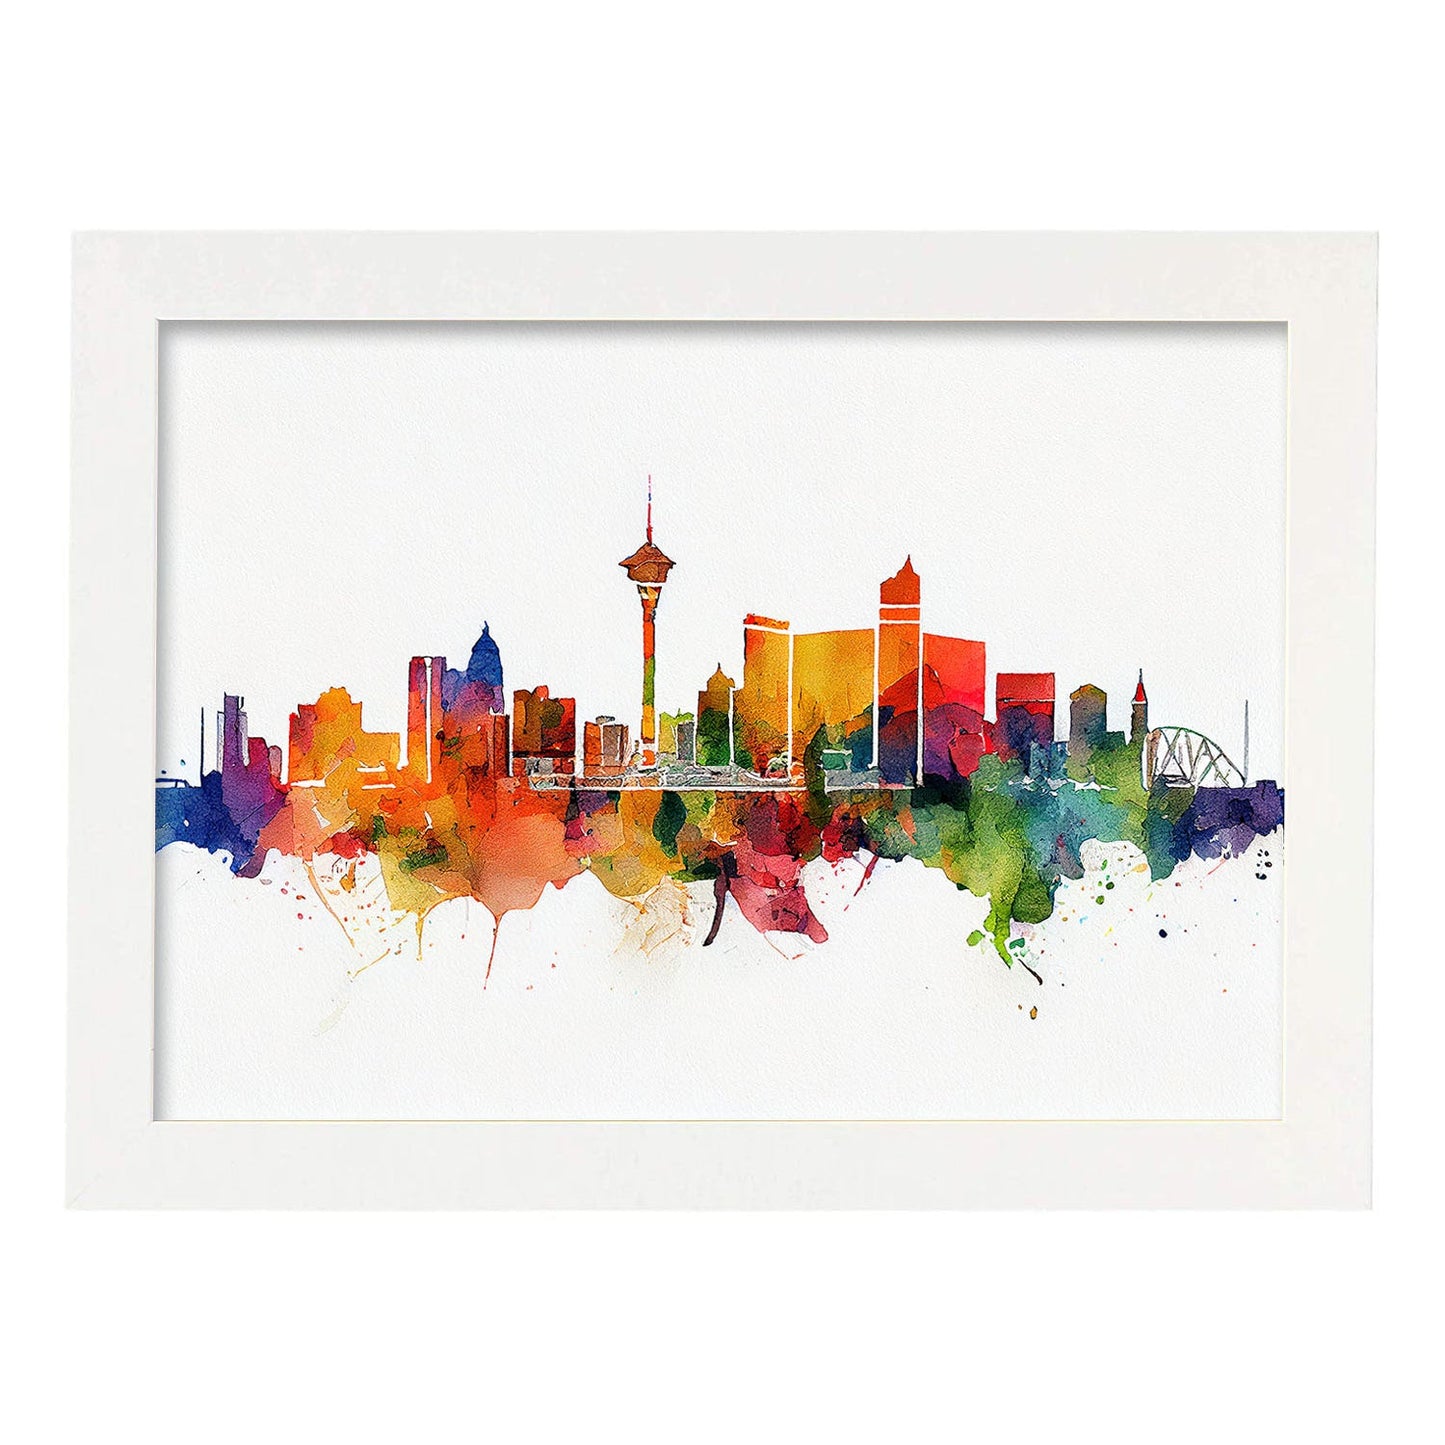 Nacnic watercolor of a skyline of the city of Las Vegas_2. Aesthetic Wall Art Prints for Bedroom or Living Room Design.-Artwork-Nacnic-A4-Marco Blanco-Nacnic Estudio SL